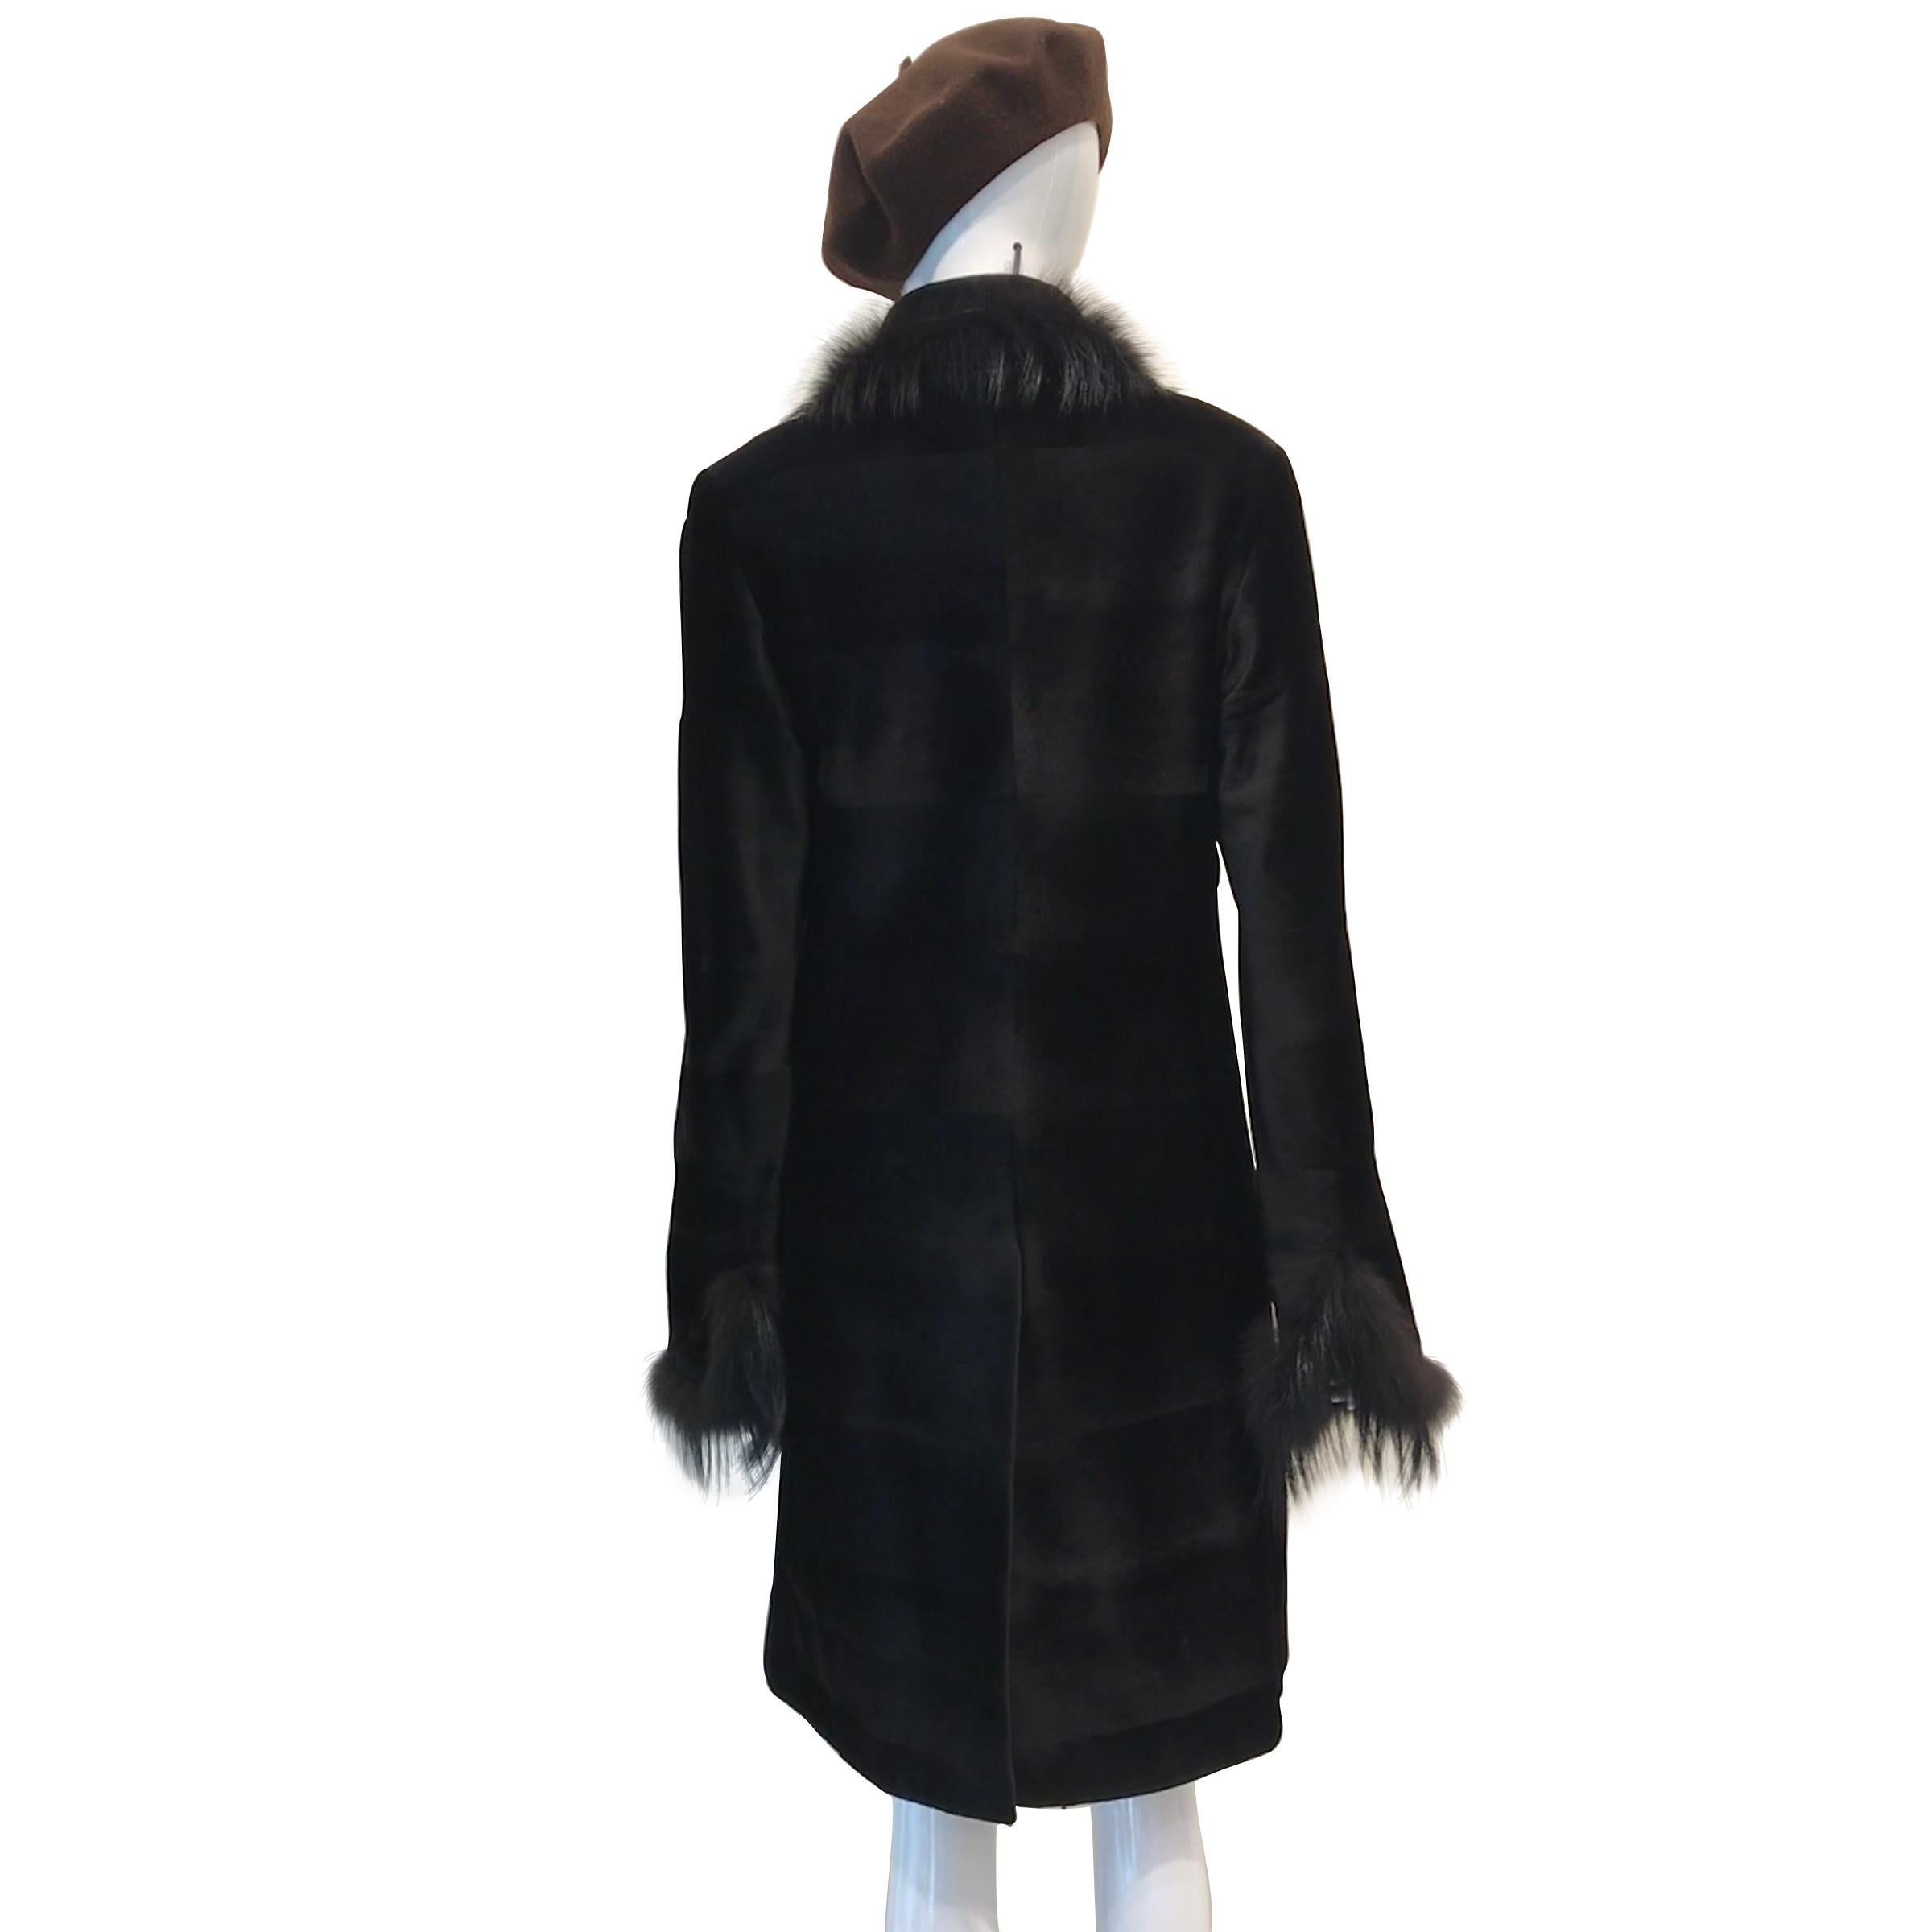 Fabulous Micro-sheared black mink  coat with black dyed  silver fox trim; fully  marked:
J.Mendel. Paris.  Fits size 4/6